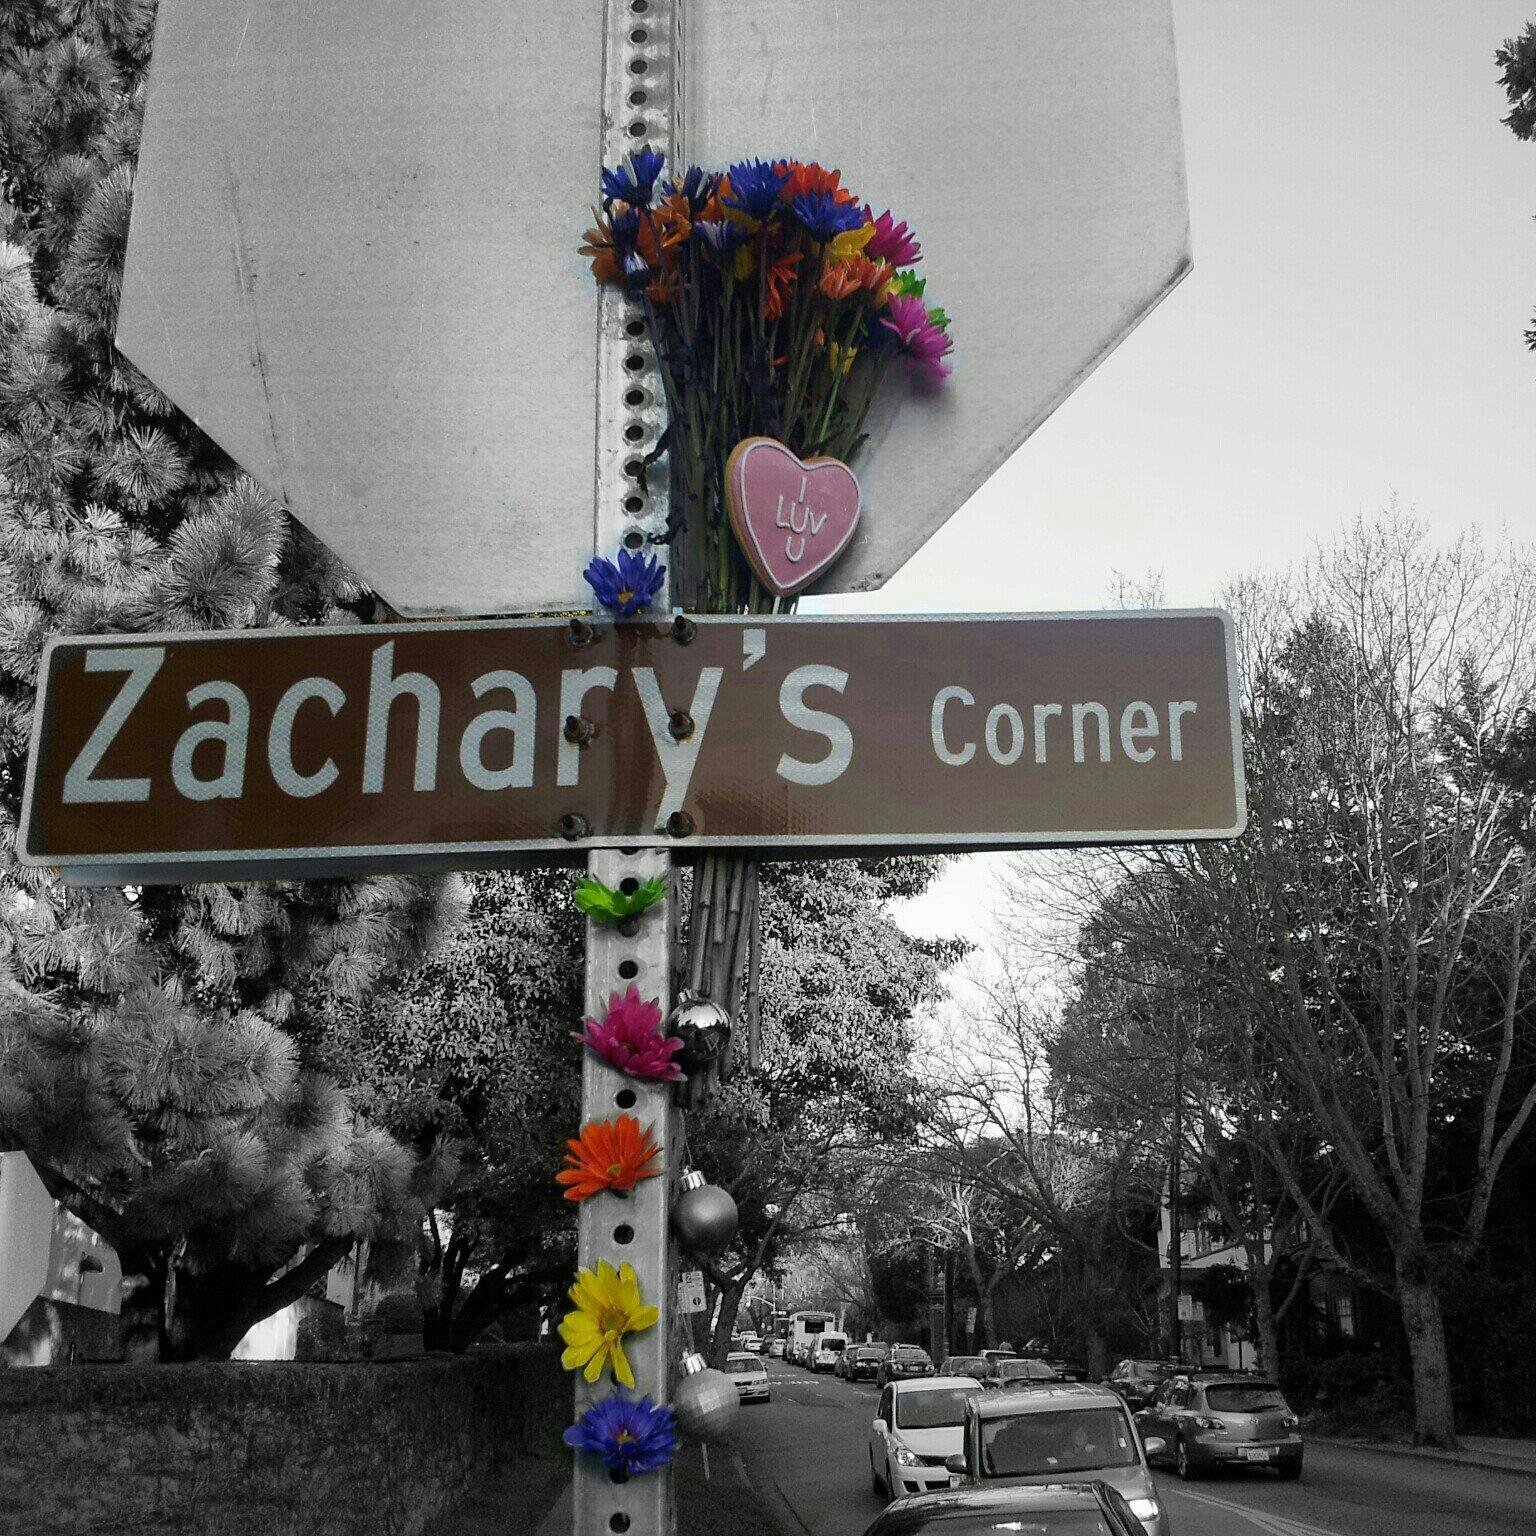 "Zachary's Corner" Sign Appears